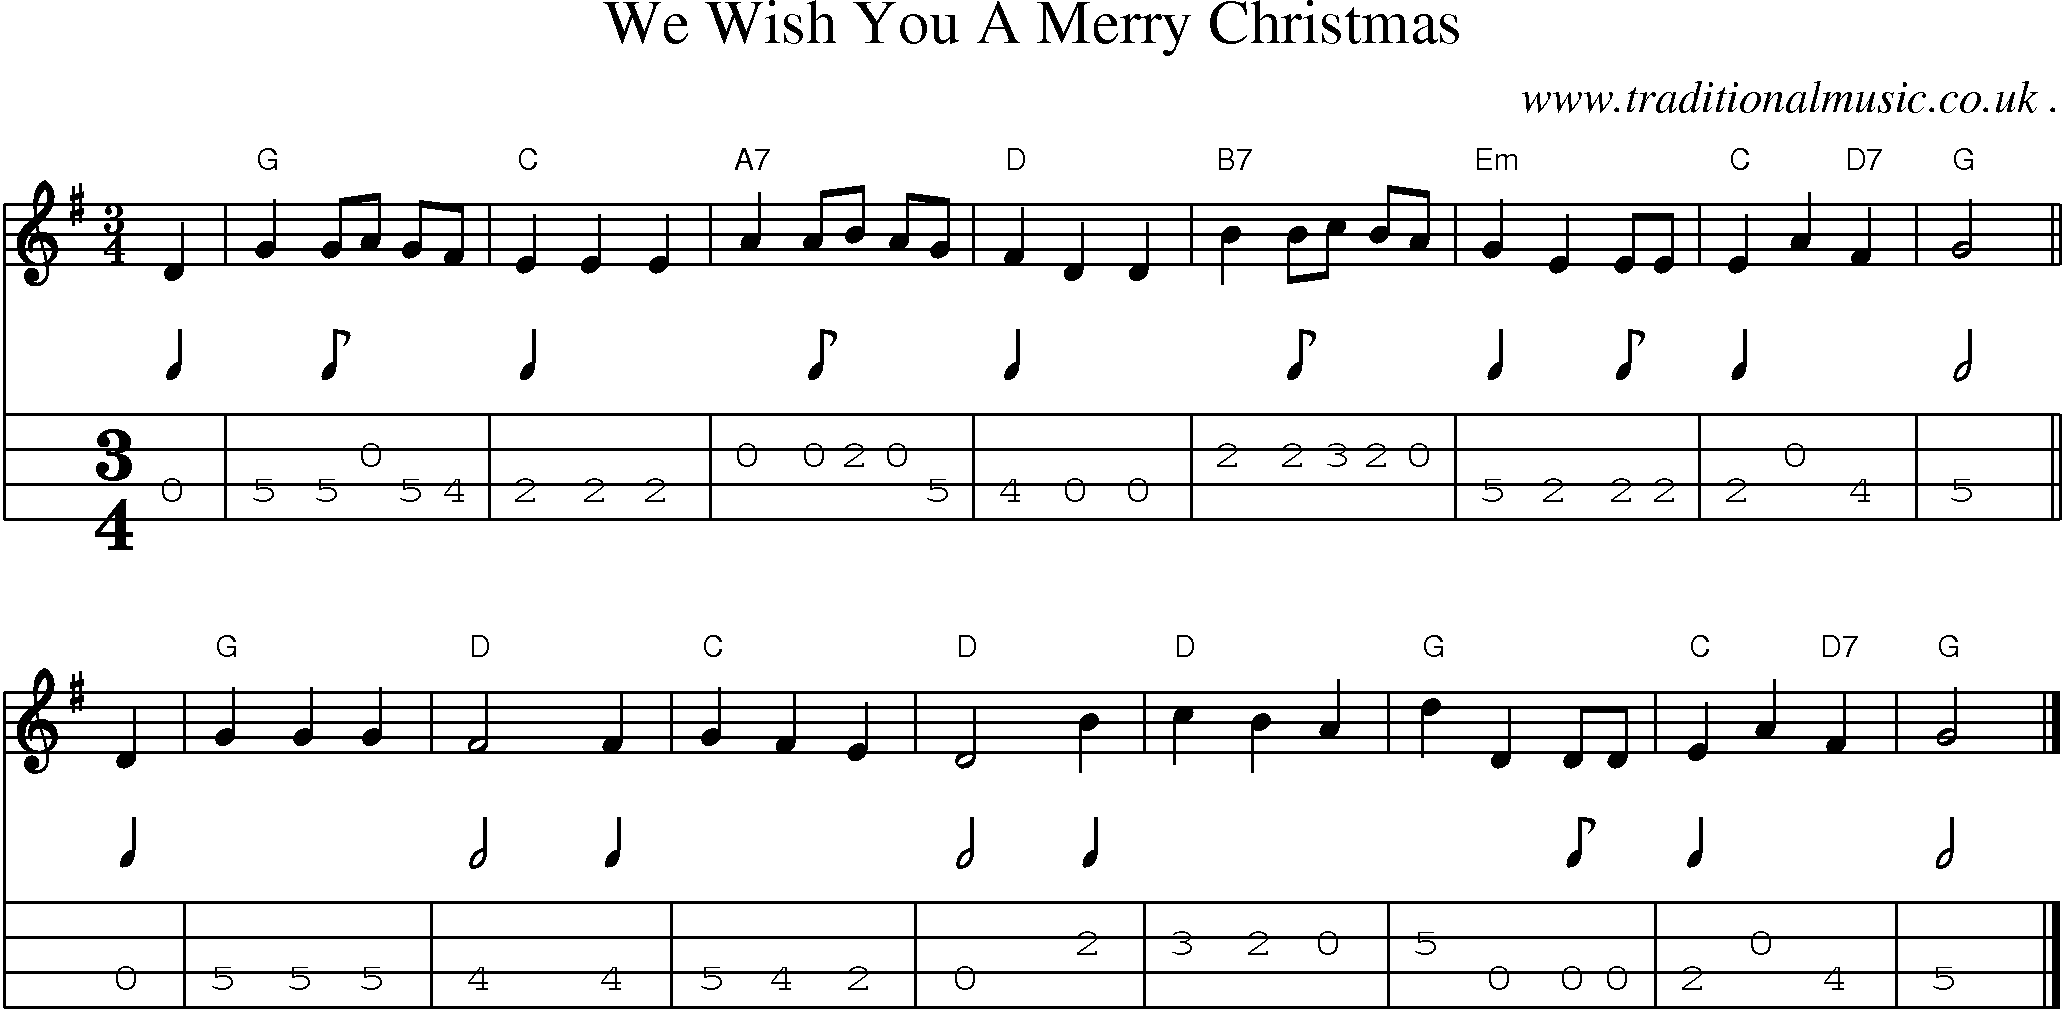 Sheet-music  score, Chords and Mandolin Tabs for We Wish You A Merry Christmas